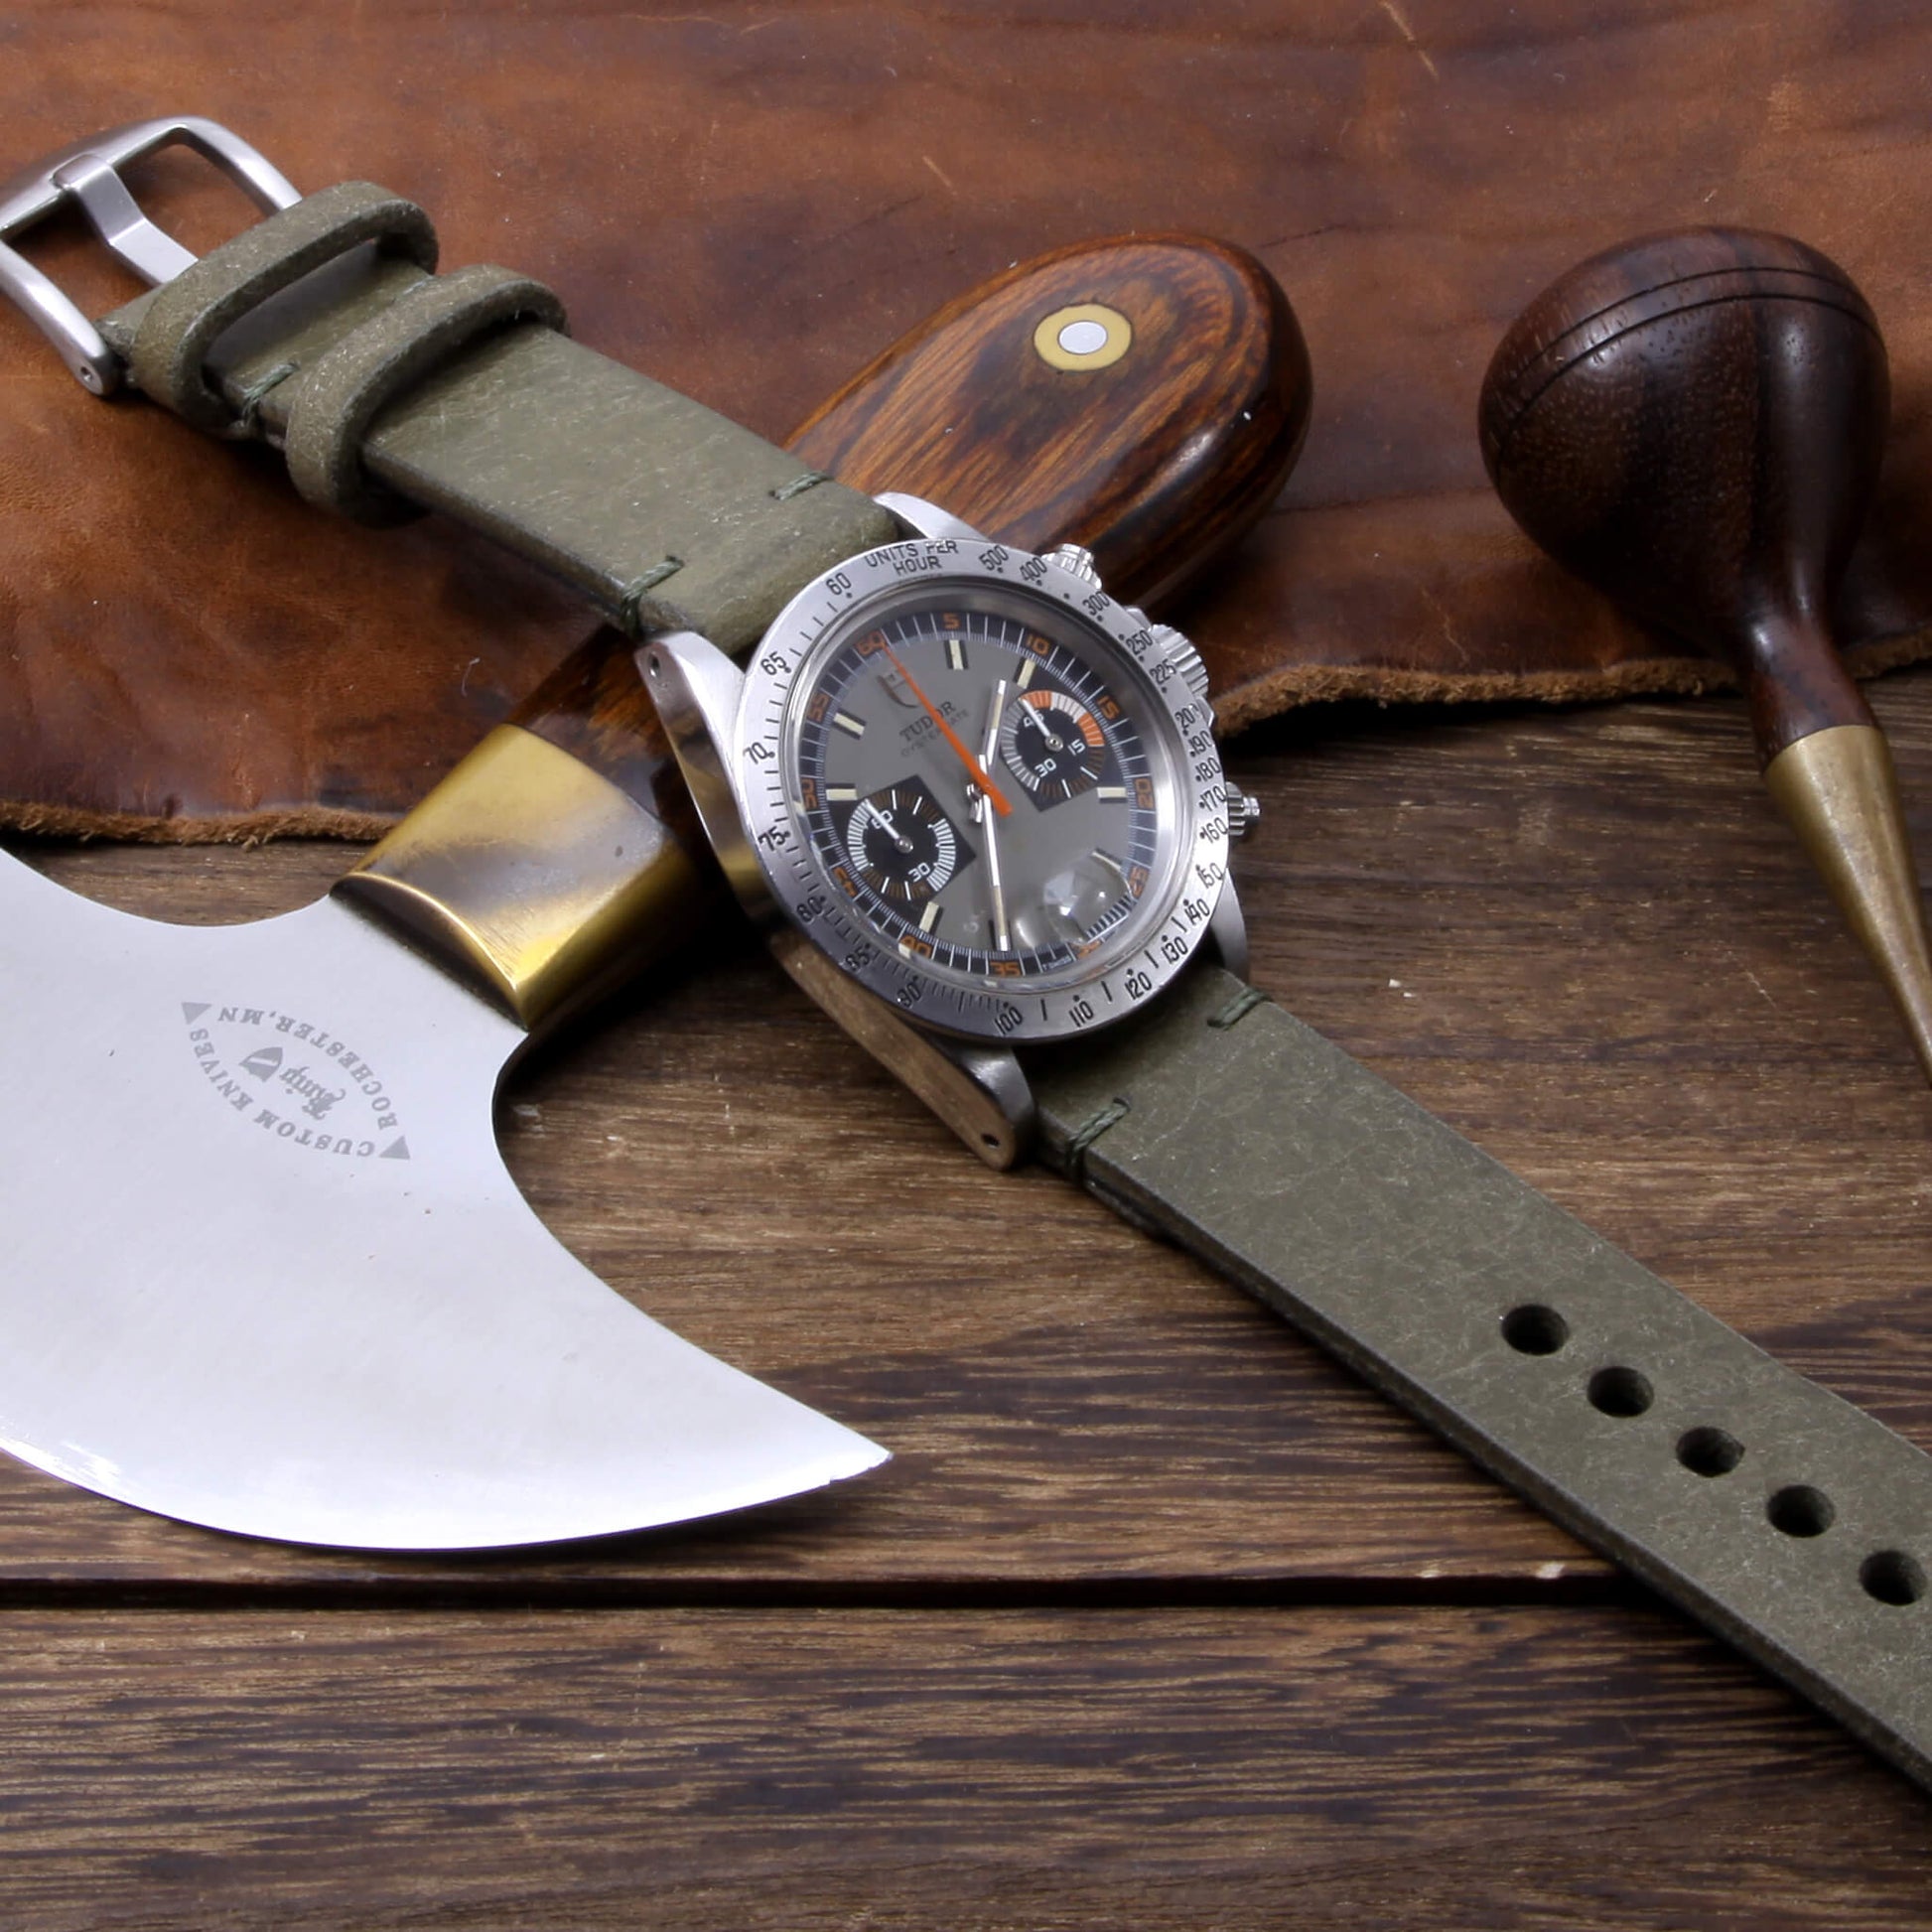 Italian Veg Tanned Leather Watch Strap for Apple Watch in Rustic Olive - Handcrafted for Style and Comfort